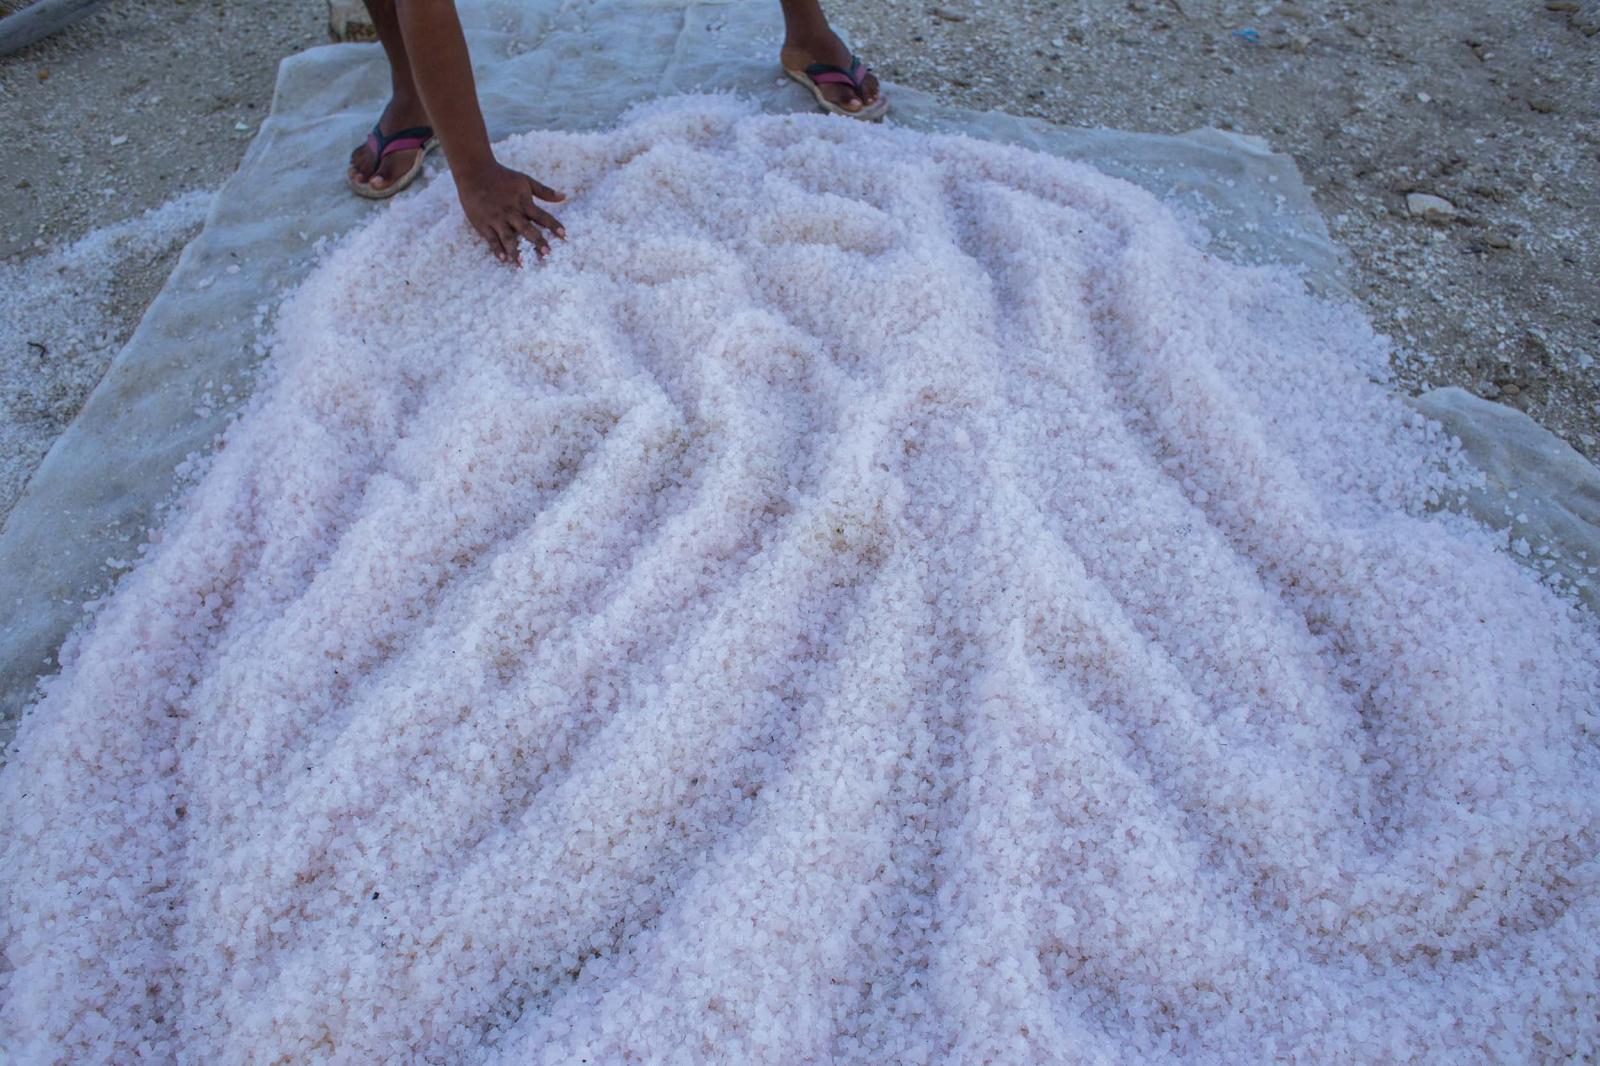 A worker estimates the salt harvest in Xtamp&uacute;, Yucat&aacute;n state, Mexico, on Saturday, October 26, 2019. Photographer: Koral Carballo/Bloomberg